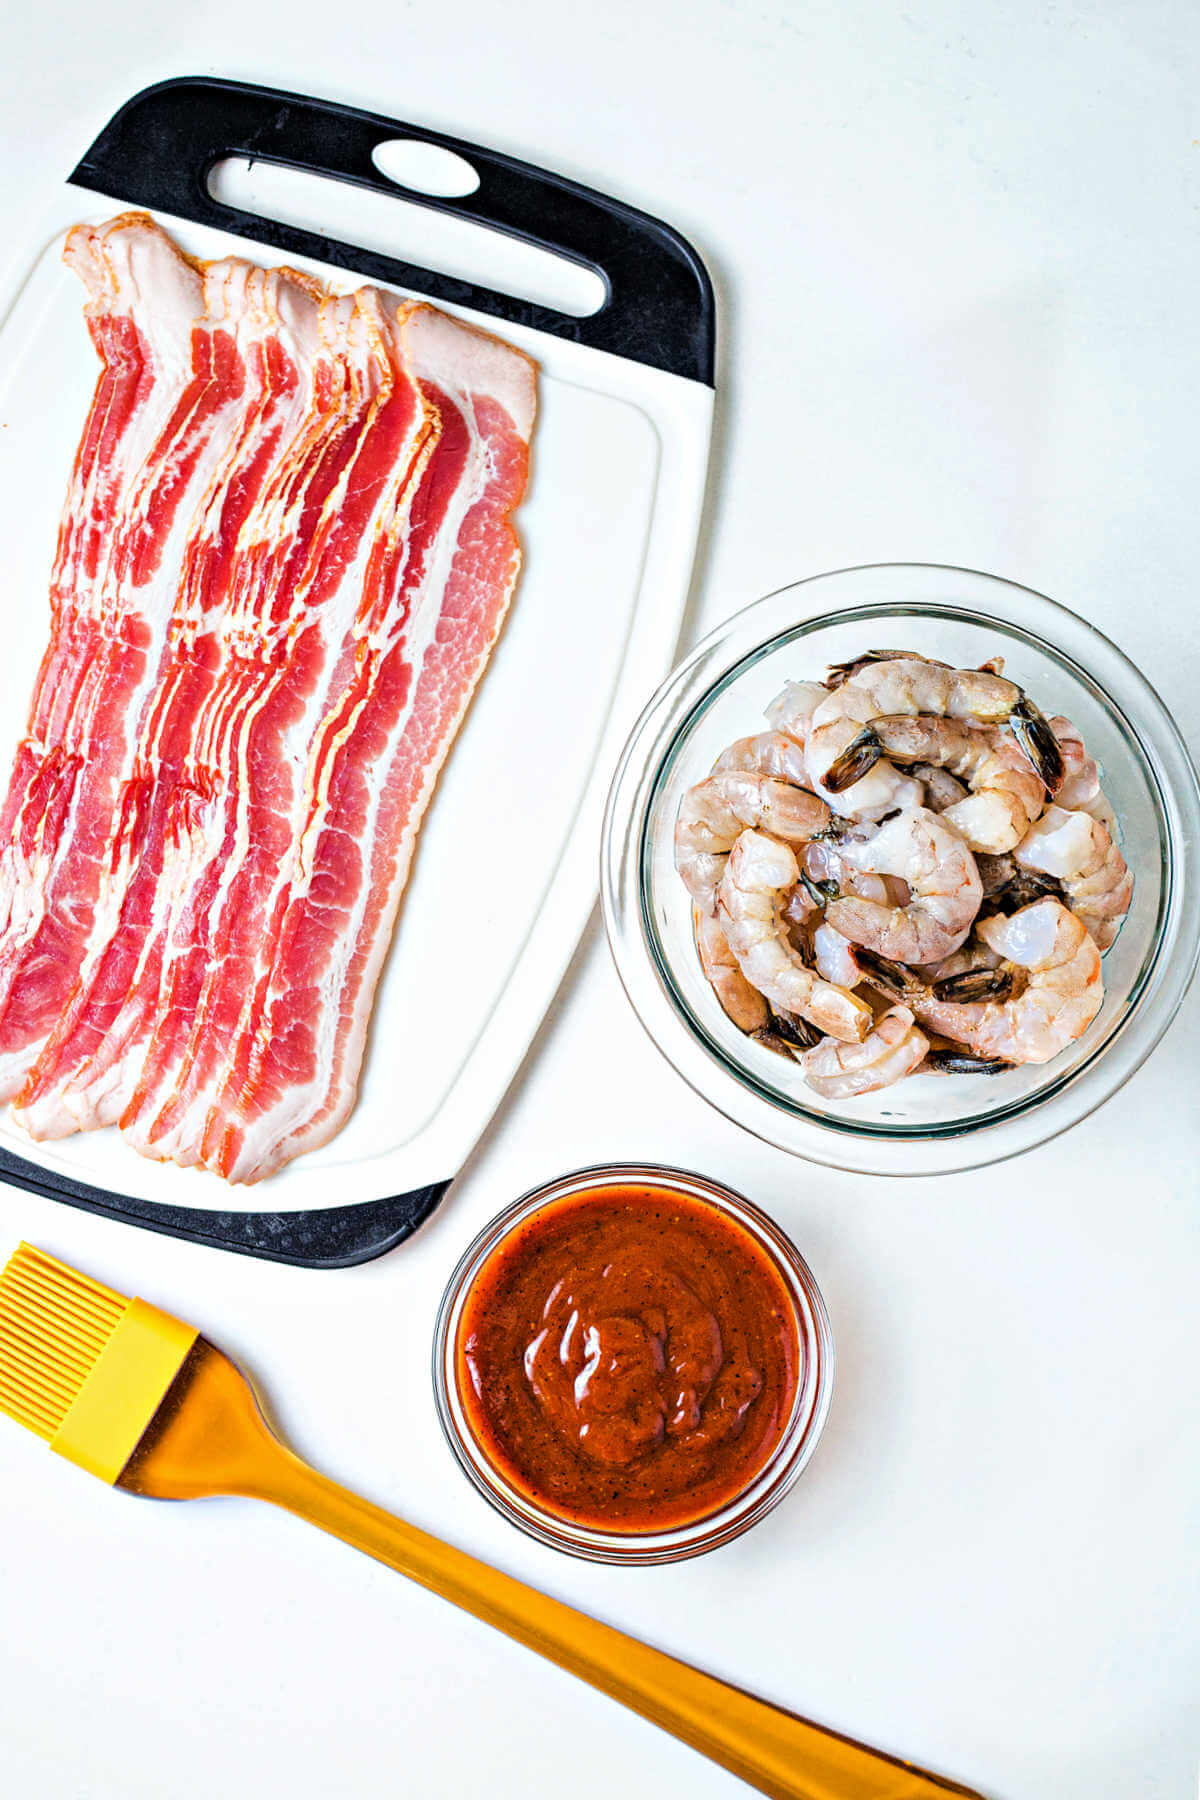 ingredients for bacon wrapped shrimp on a table.